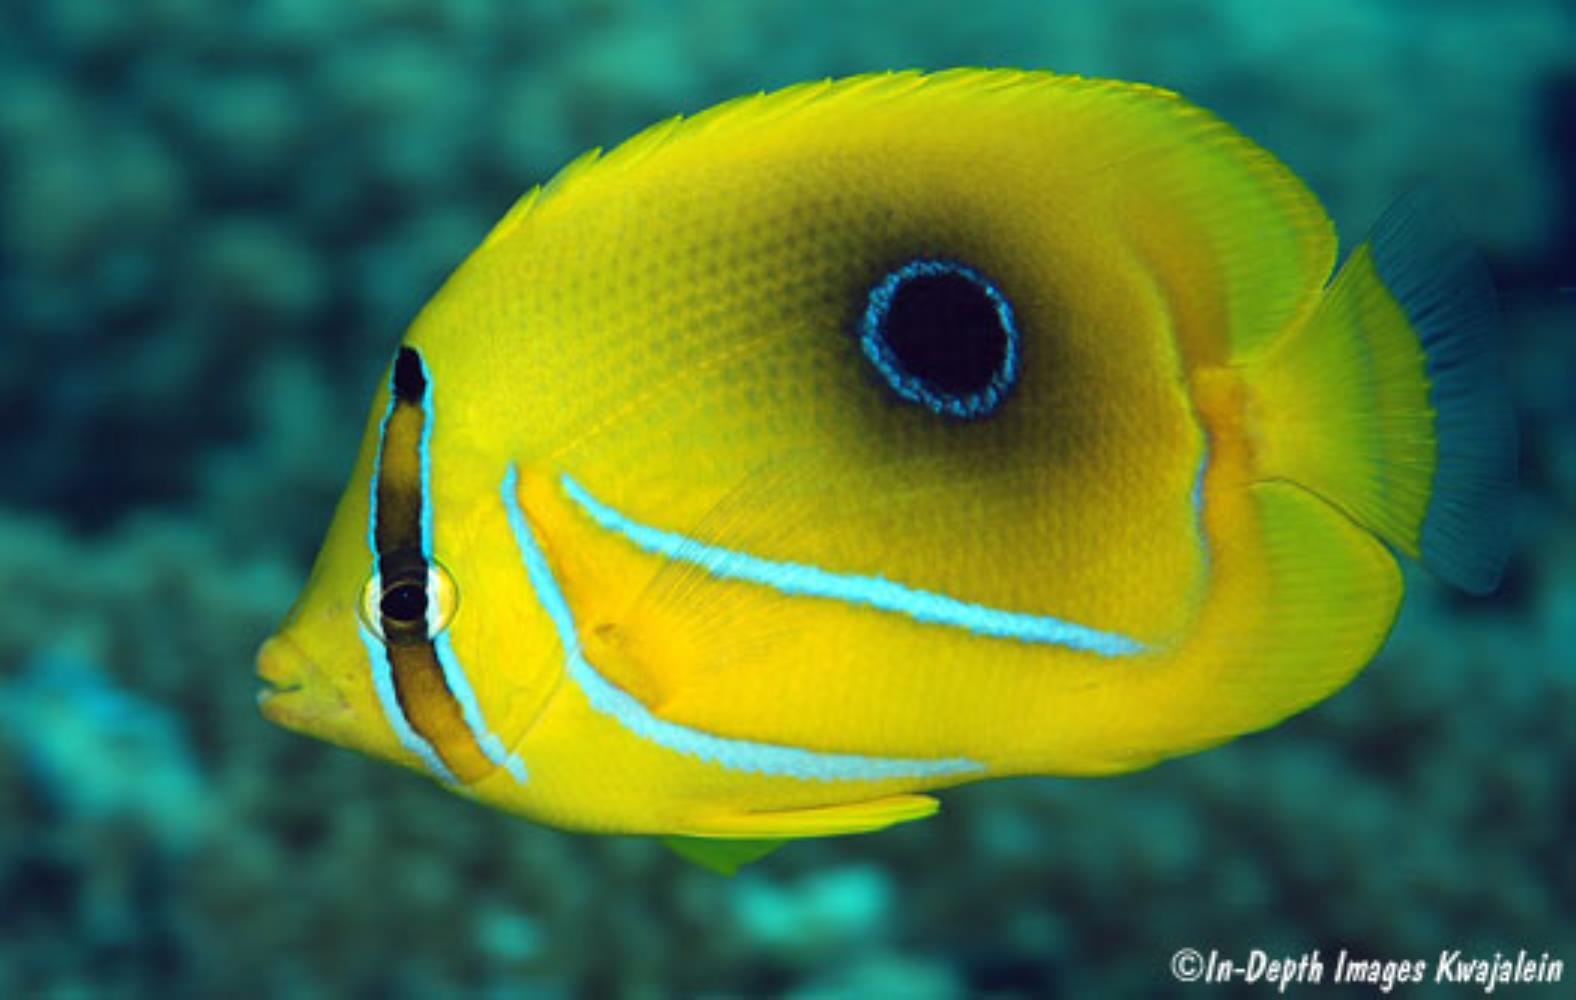 Bluelashed Butterflyfish